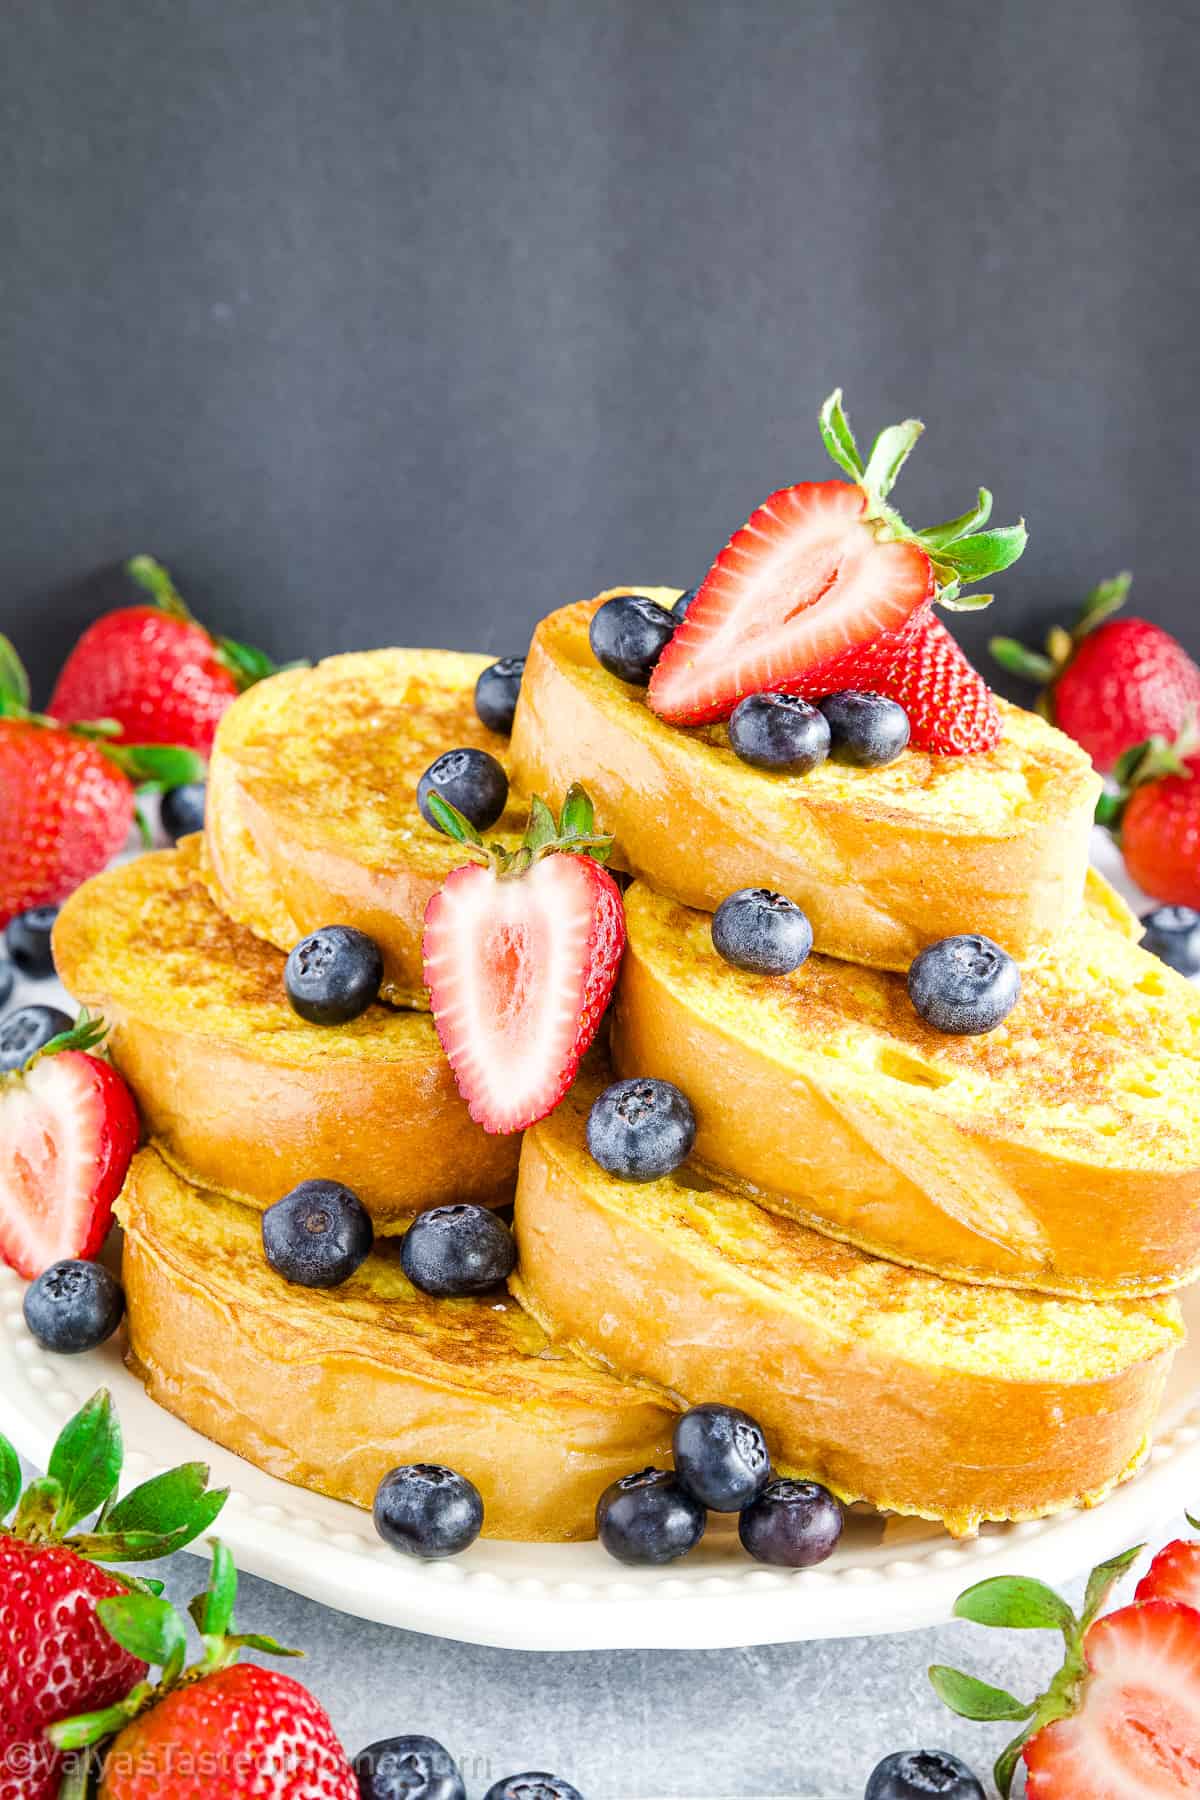 This is the easiest French toast at home recipe made using homemade French bread slices that are dipped in the perfect batter and sauteed in butter for a deliciously soft, sweet, and tasty breakfast!